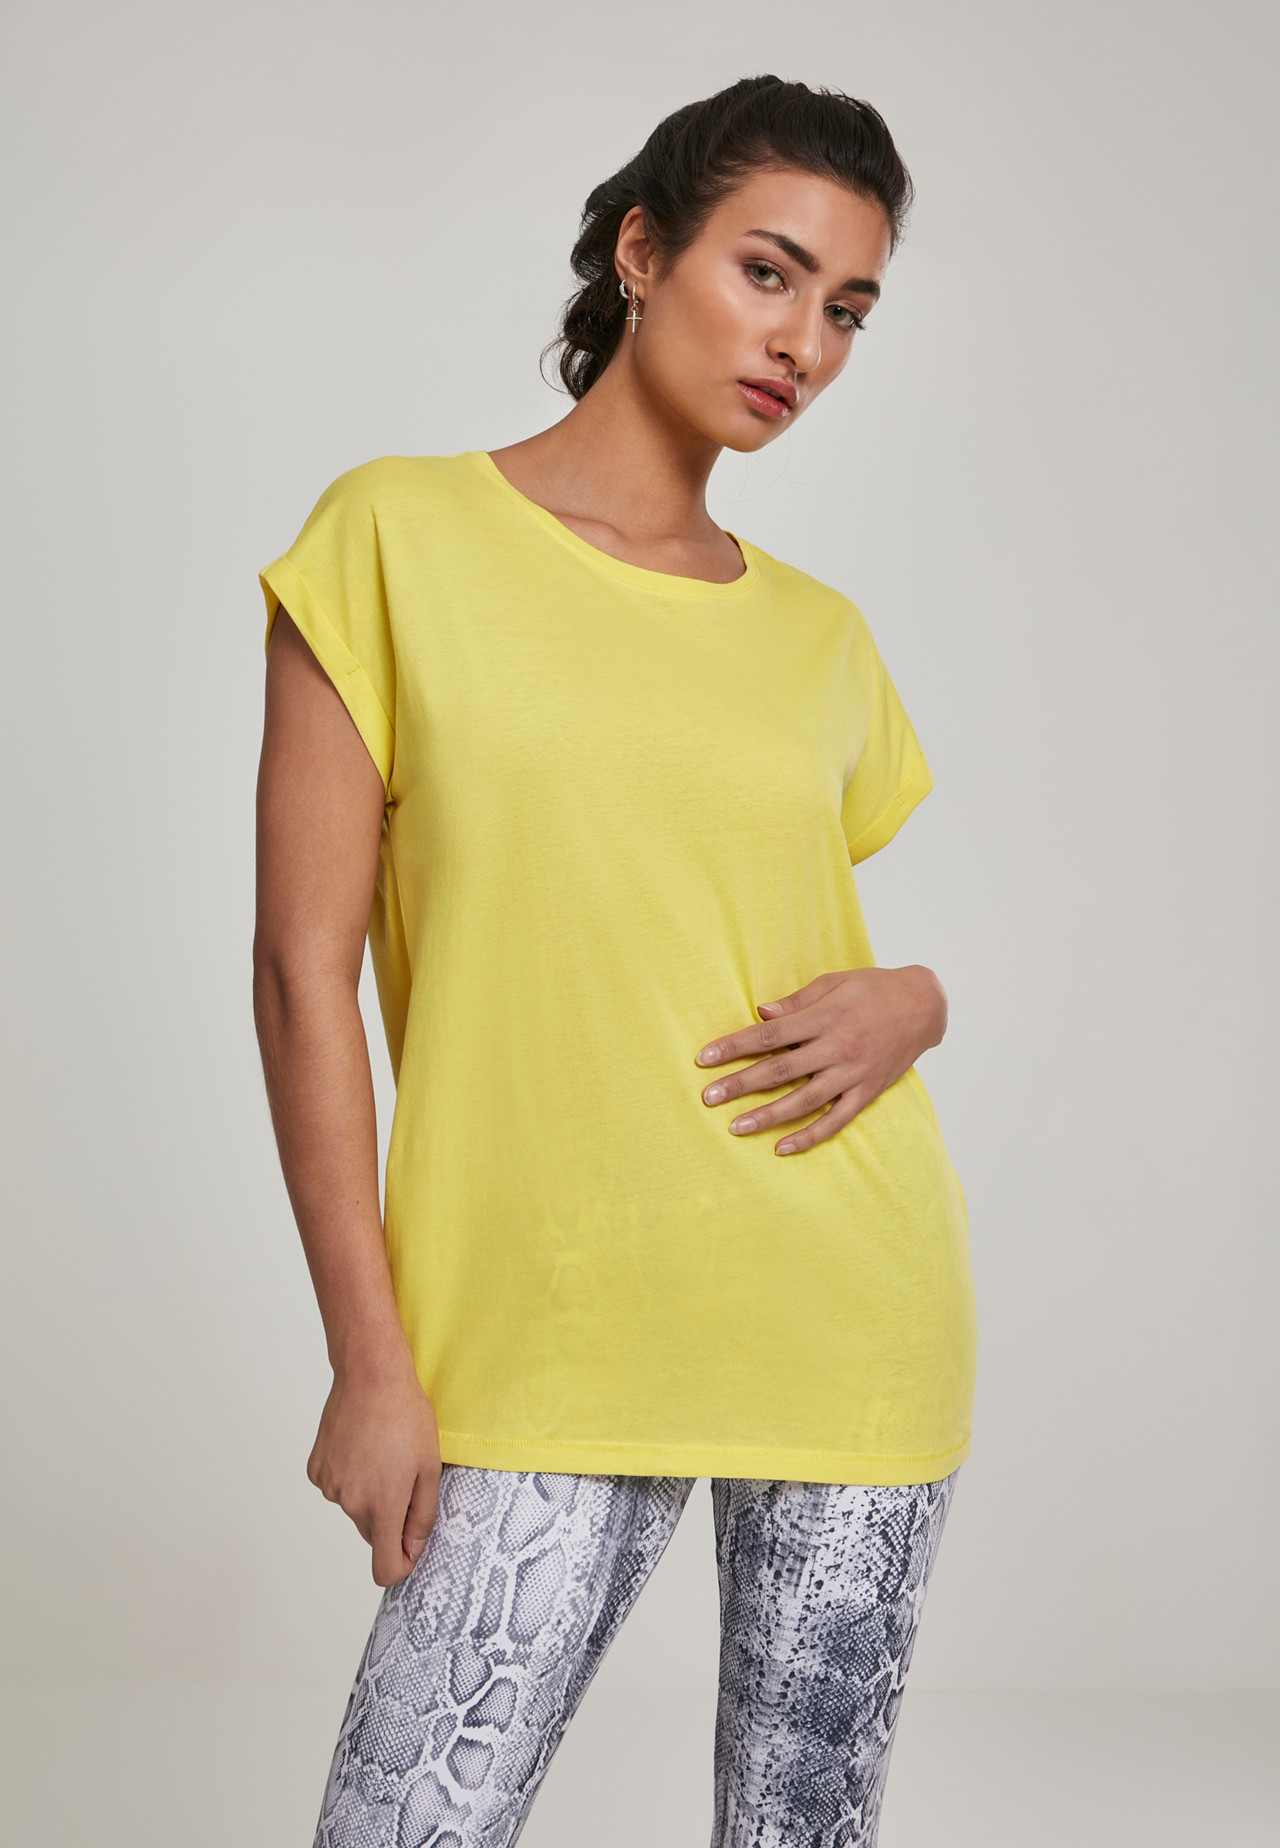 Urban Classics Ladies Extended Shoulder Tee (Bright Yellow, XL)